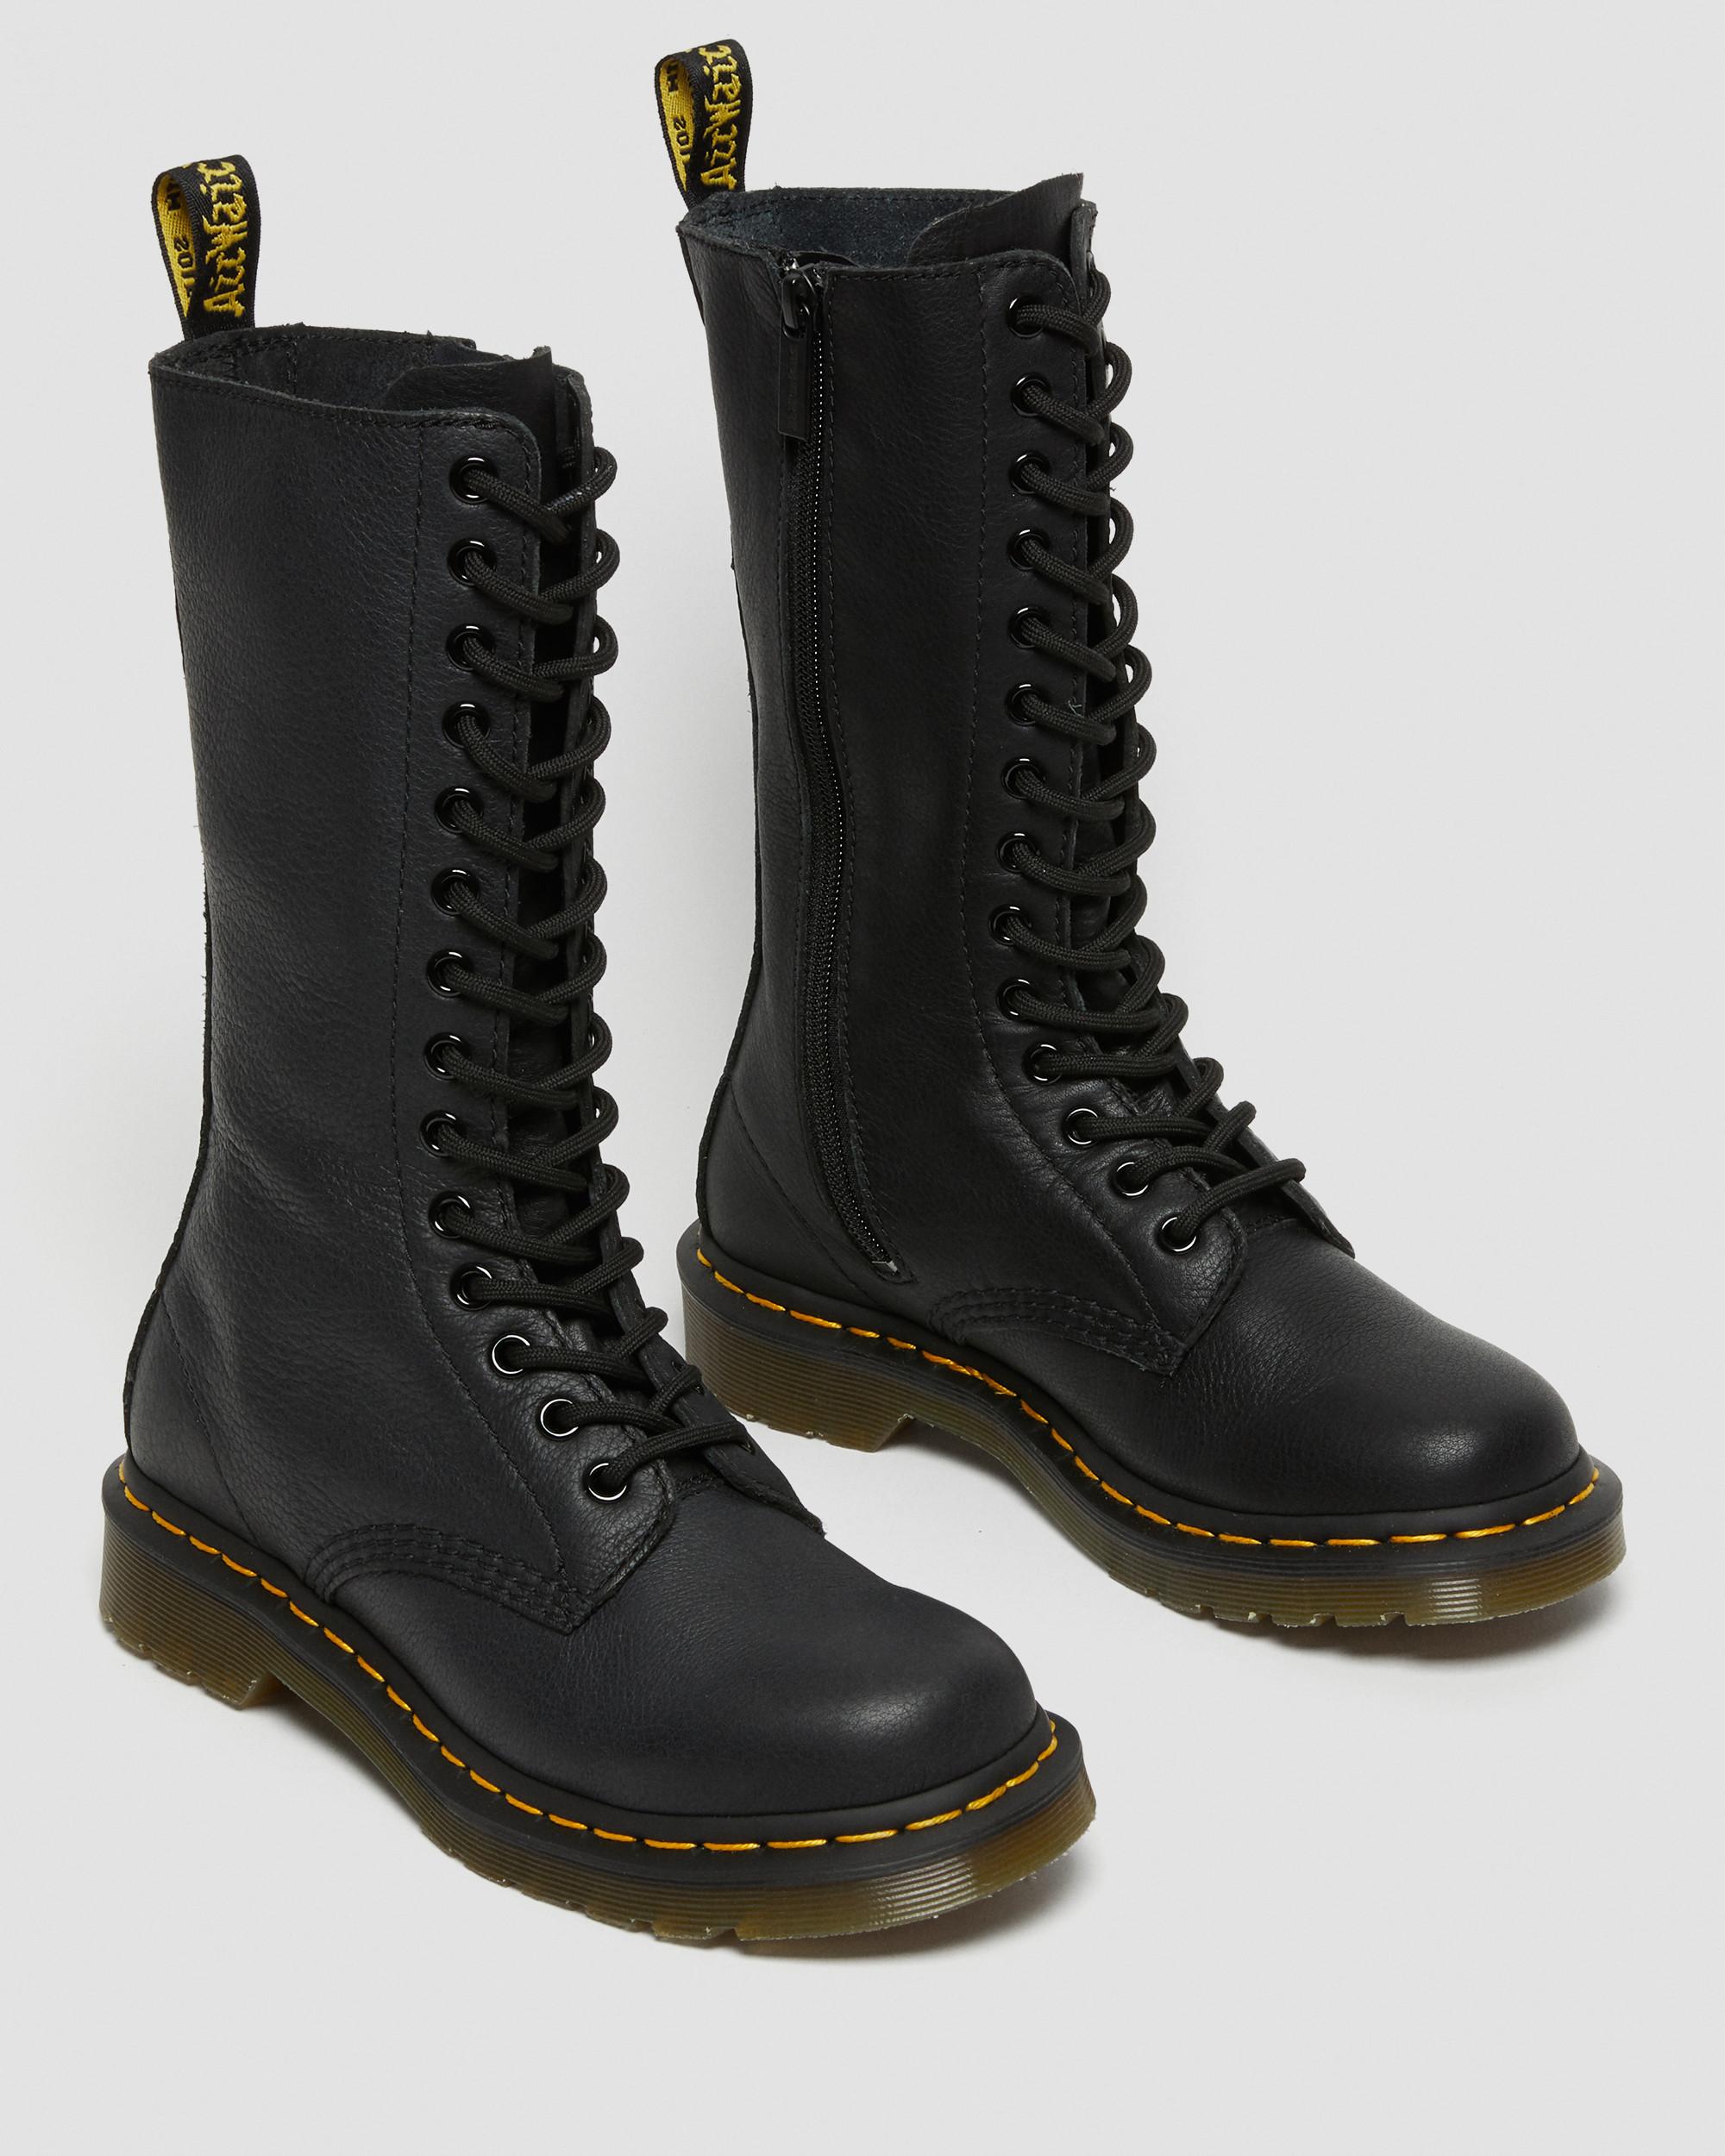 1B99 Virginia Leather Mid Calf Boots in Black